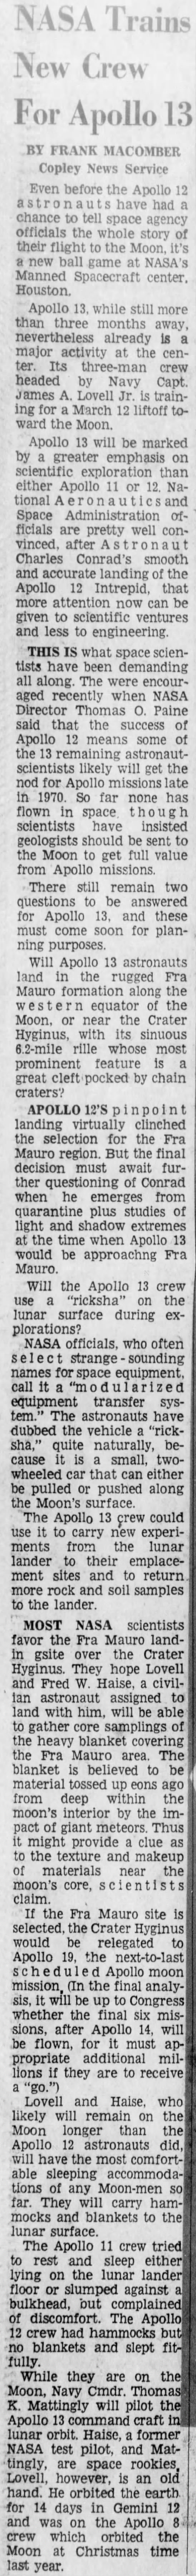 NASA trains crew for Apollo 13; moon mission will have greater emphasis on scientific exploration